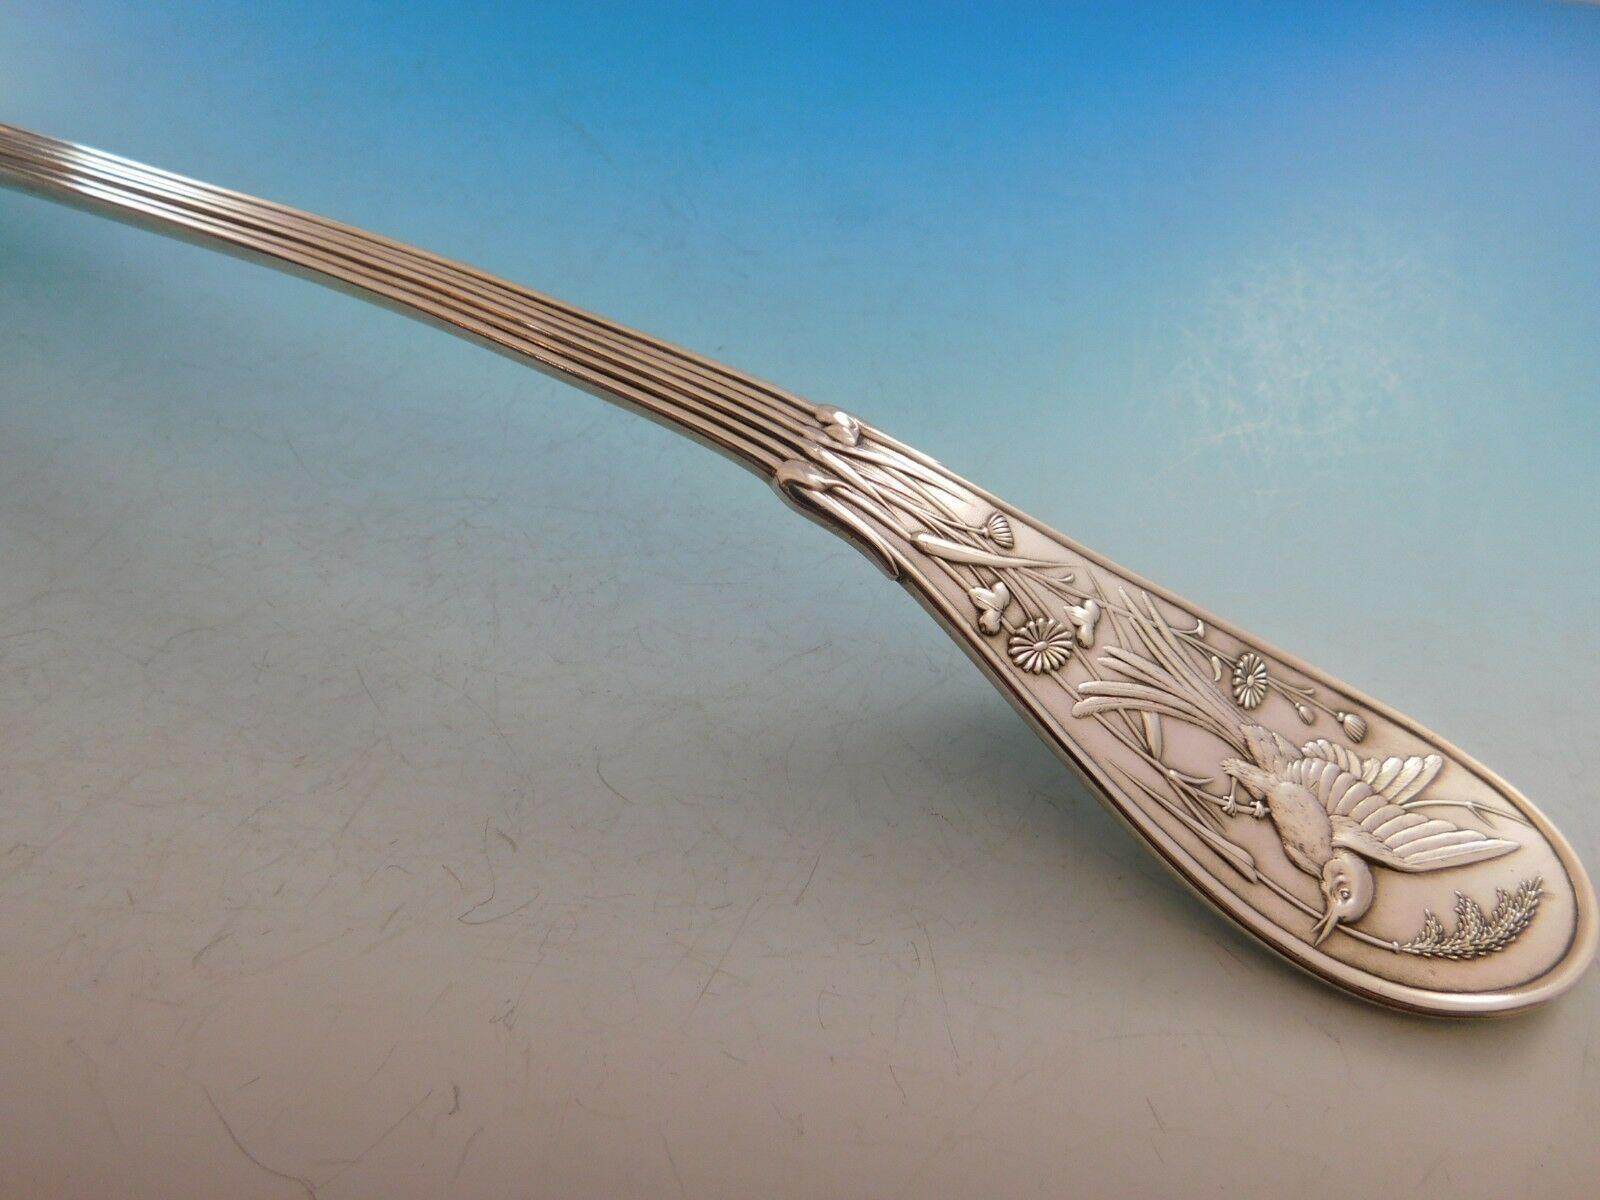 Stunning sterling silver soup ladle measuring 12 3/4